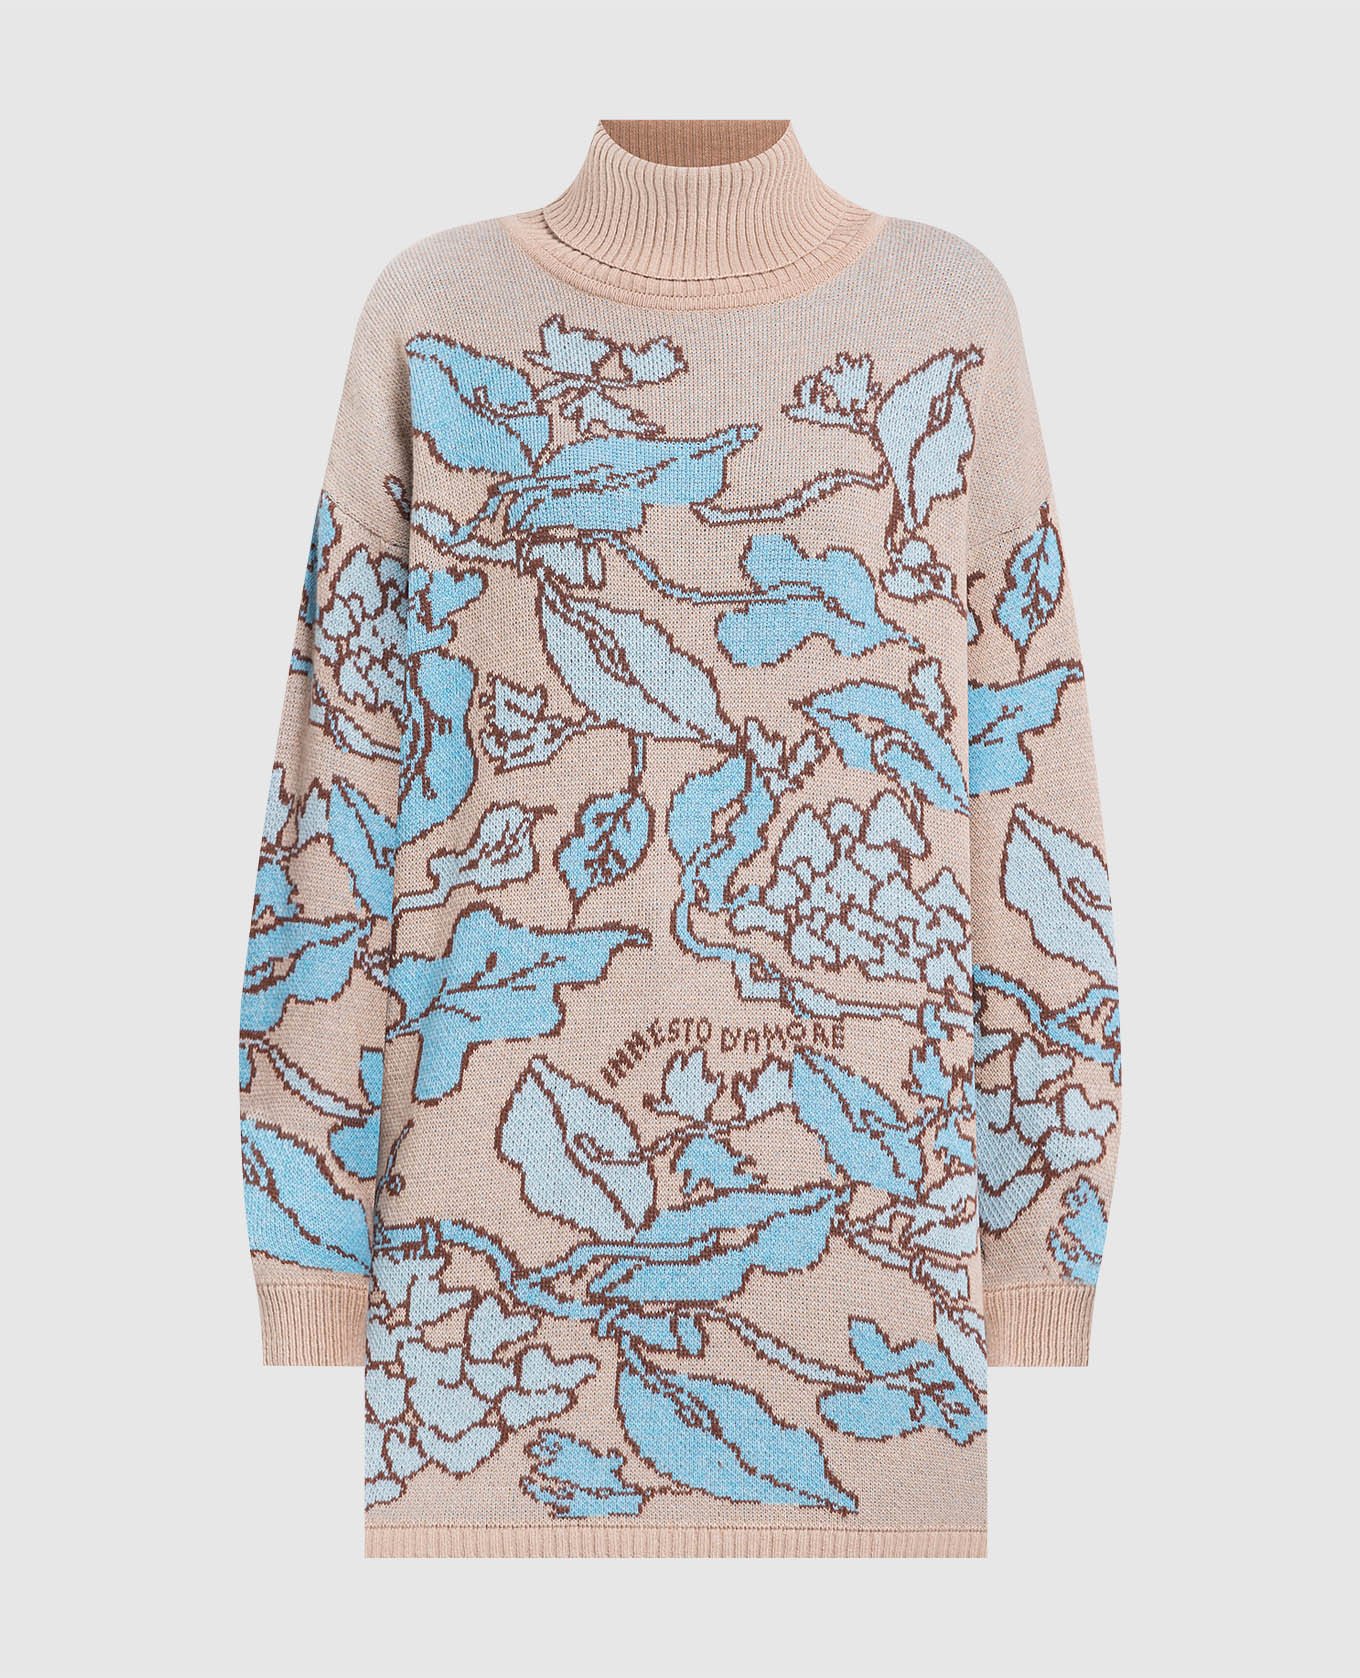 Brown sweater in a floral pattern